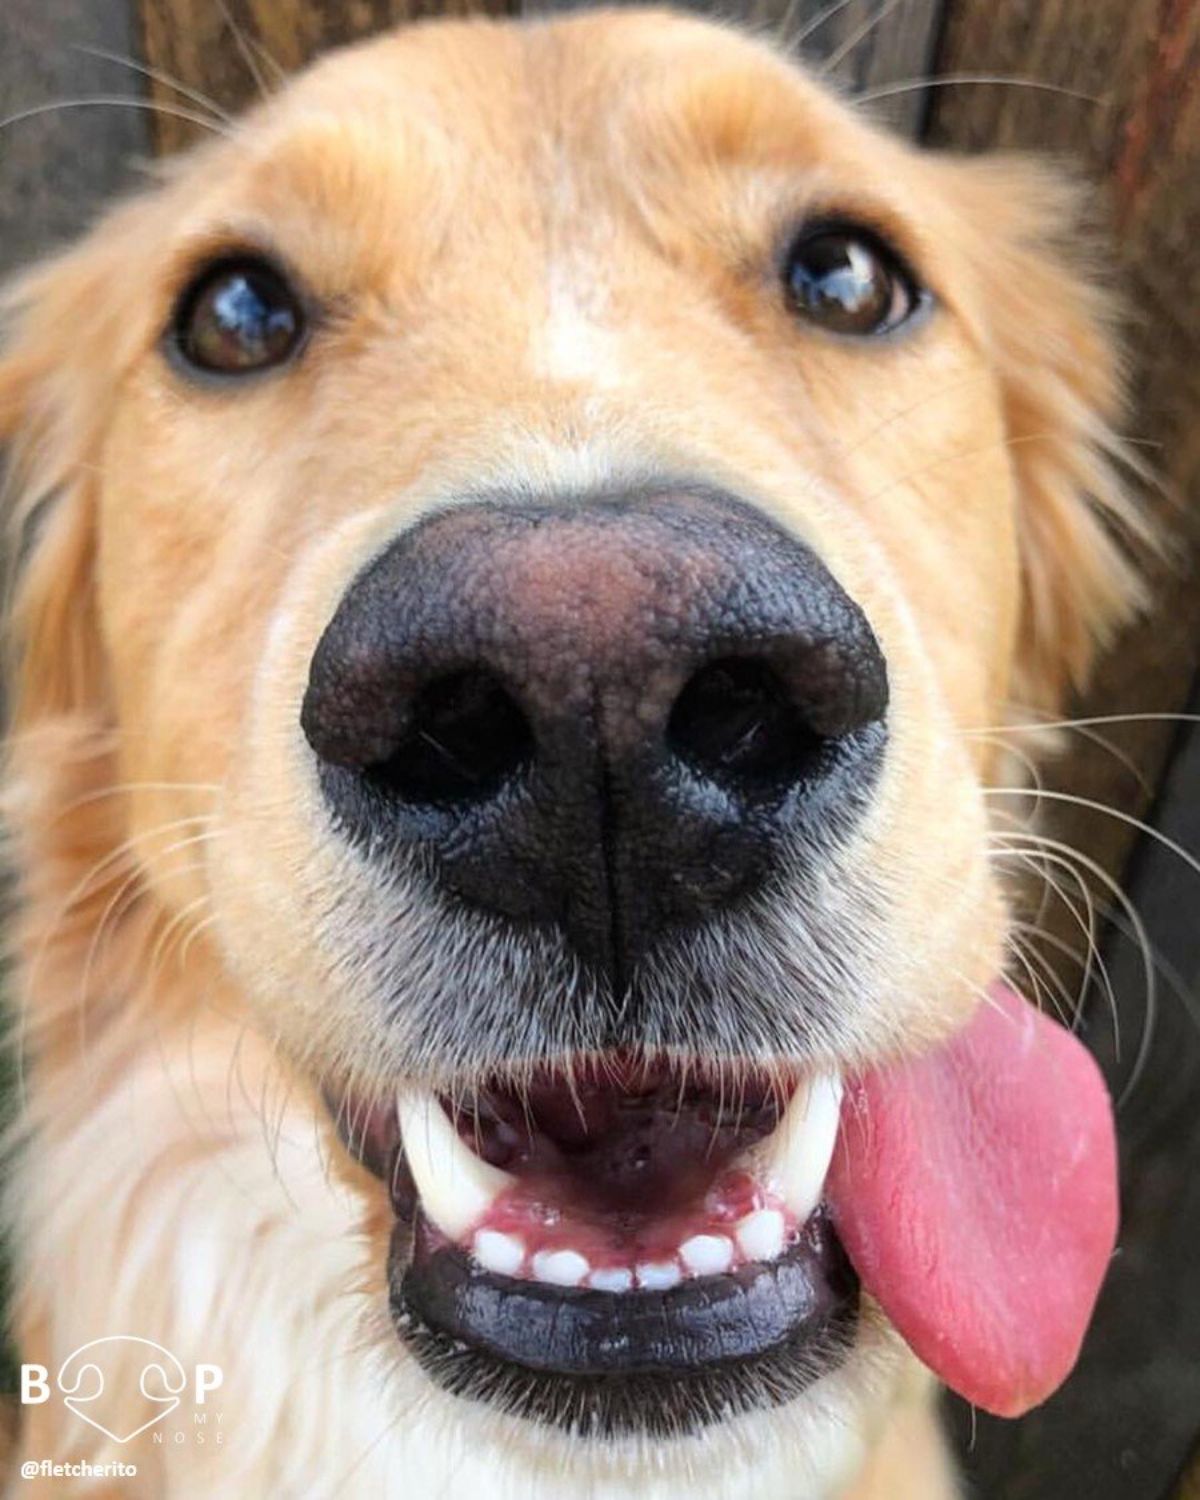 close up of golden retriever's face with the tongue sticking out from the side